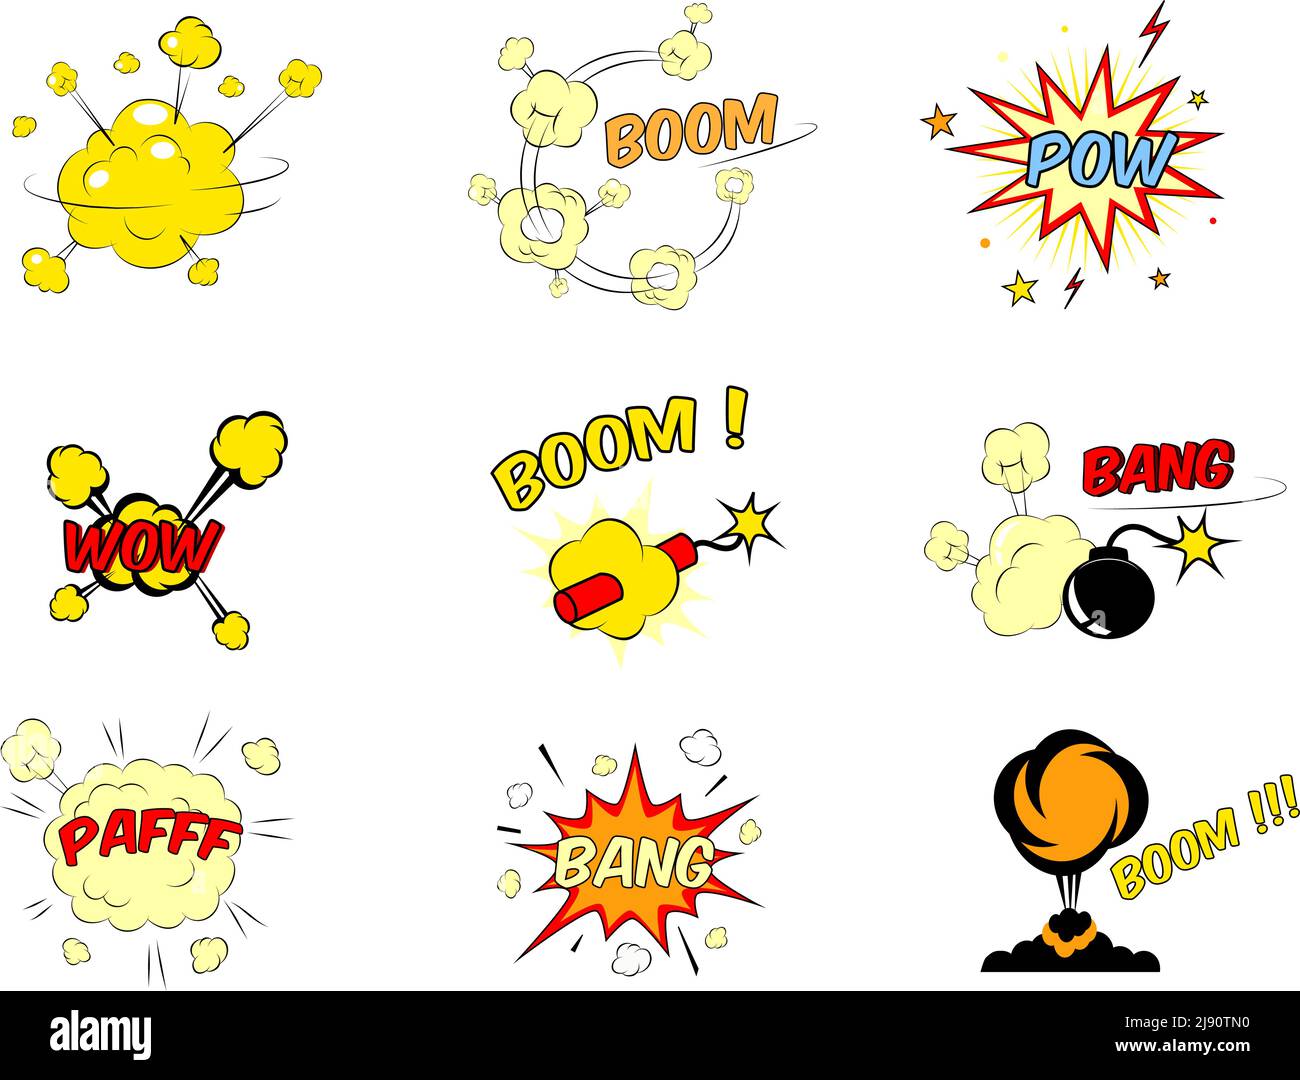 Set of colorful bright red and yellow comic cartoon text explosions depicting a boom  pow  wow  dynamite  bomb  bang  pafff  bang and ground explosion Stock Vector